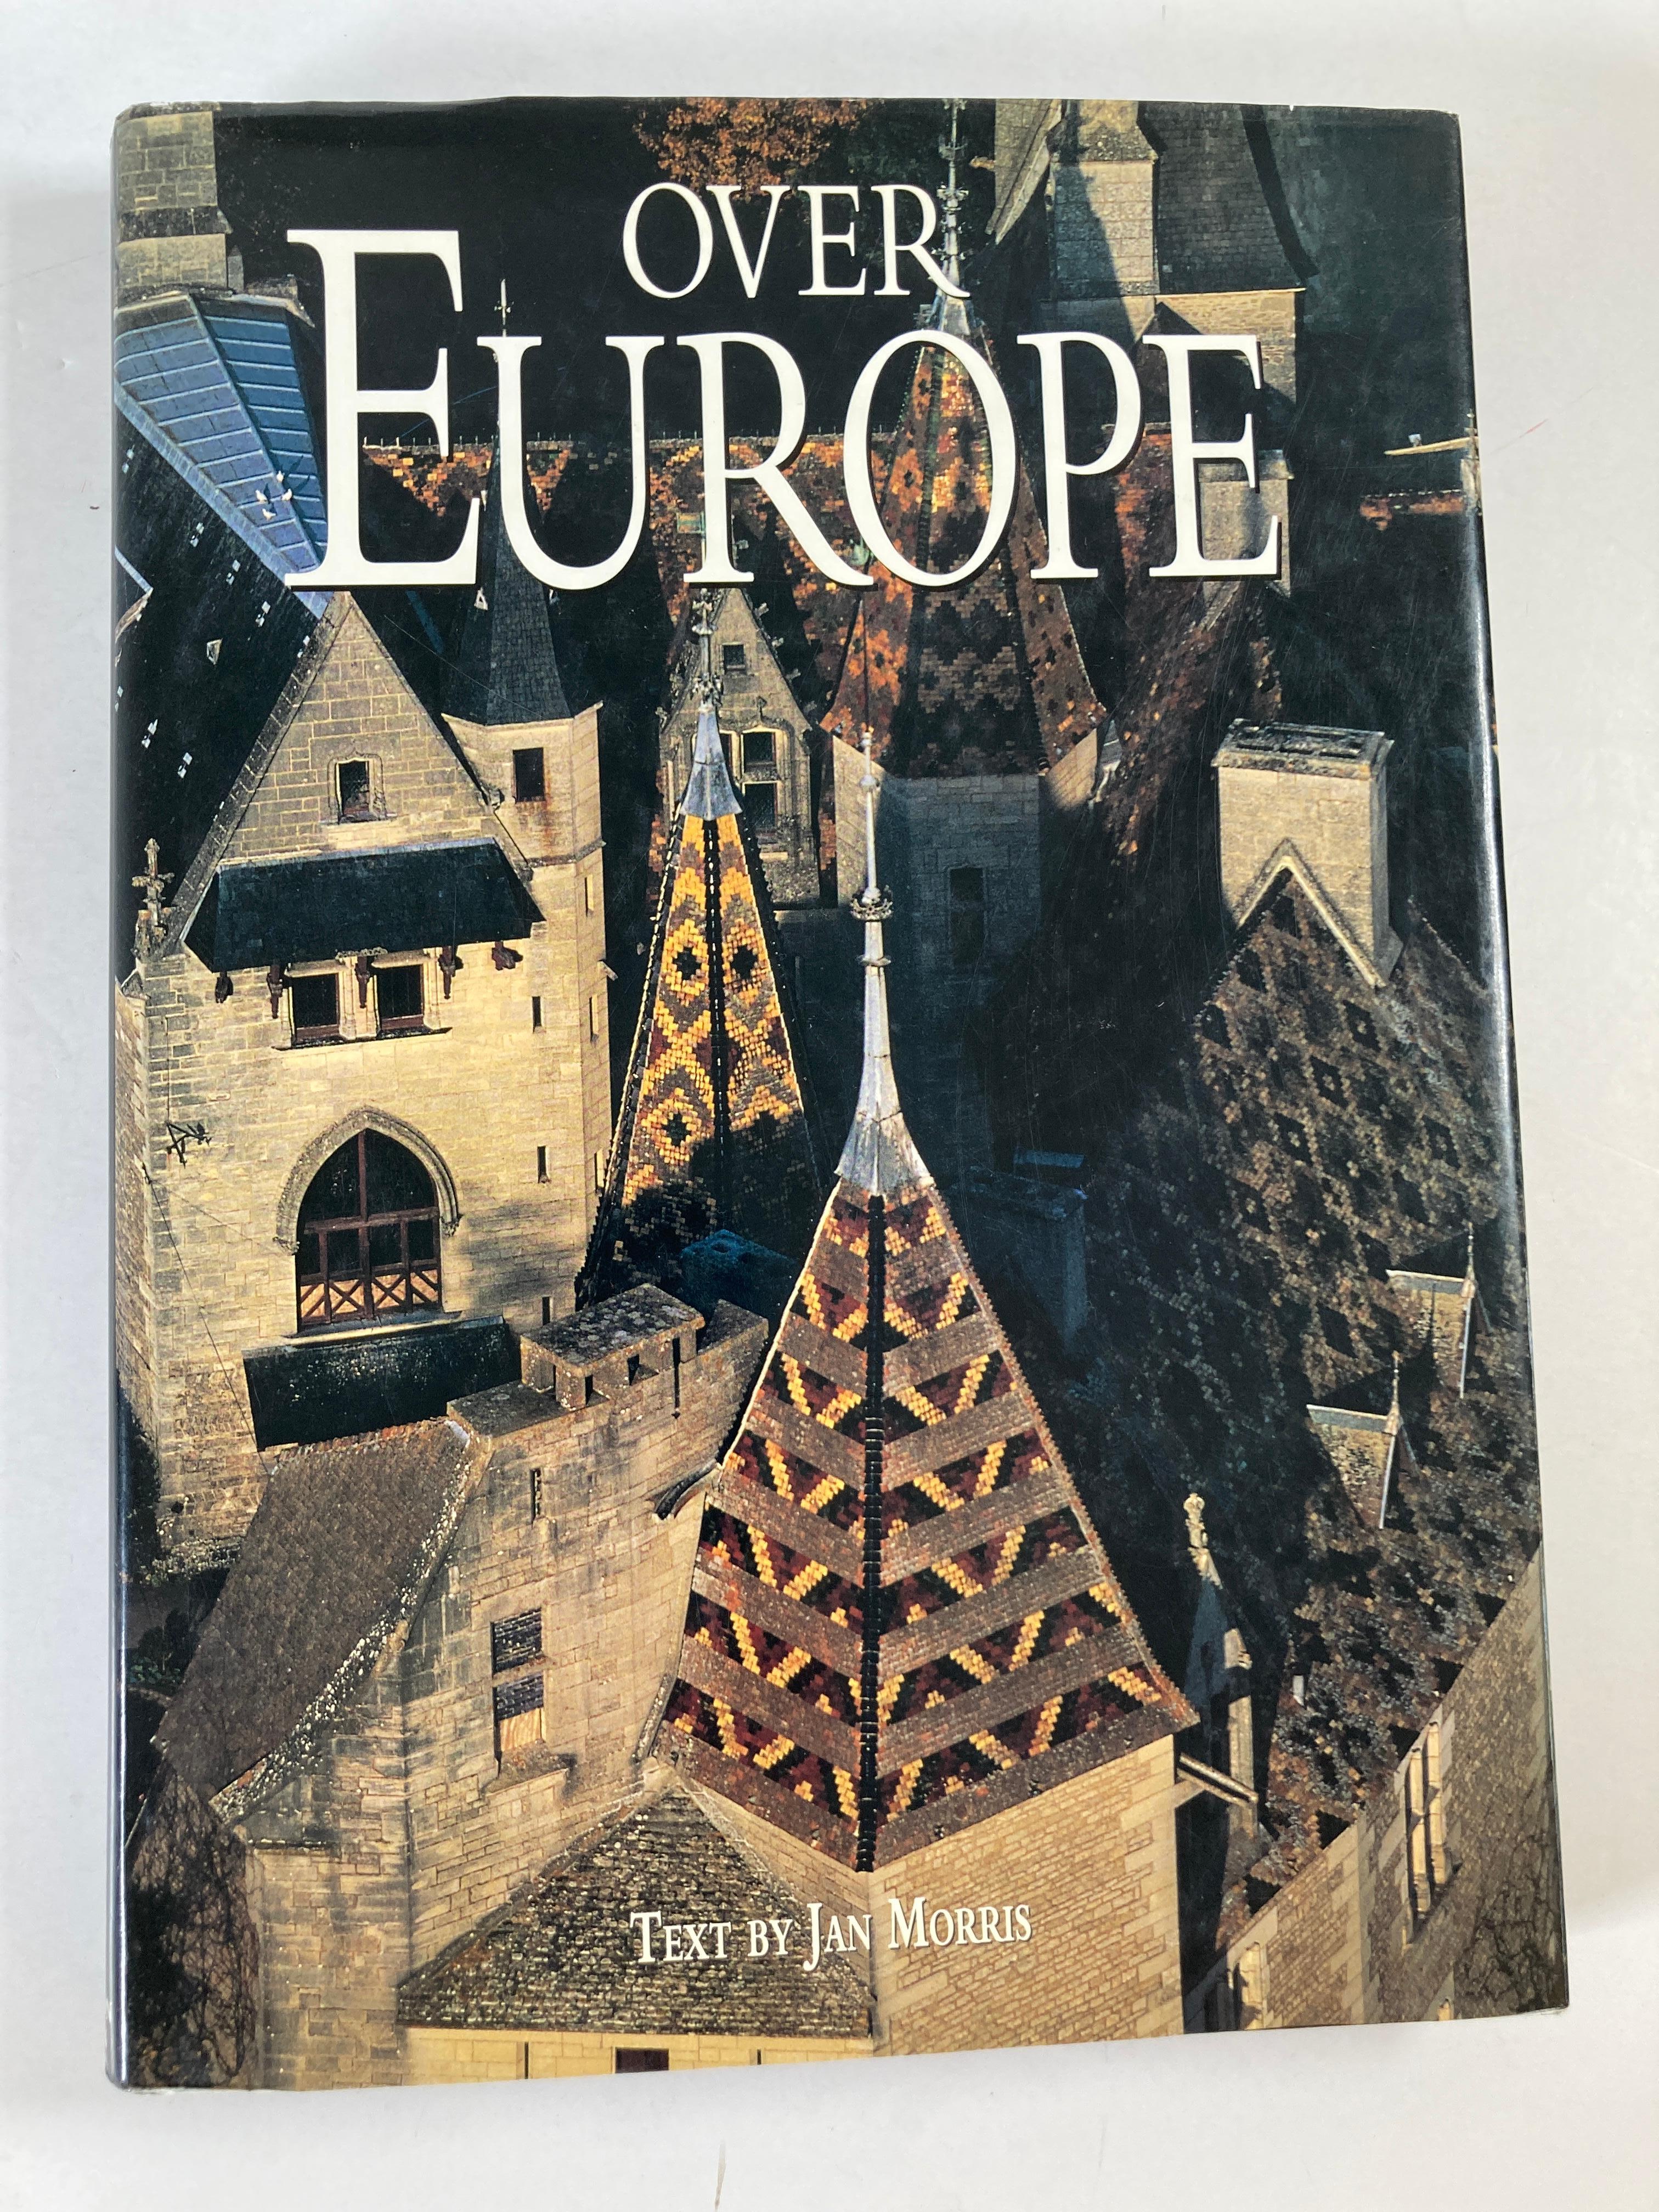 Over Europe book, September 1, 1992
by Jan Morris (Author).
Fabulous aerial photographs of Europe, with text by Jan Morris! Front of dust jacket has wonderful photograph of Chateau de Chaumant in France. Back of jacket has four smaller